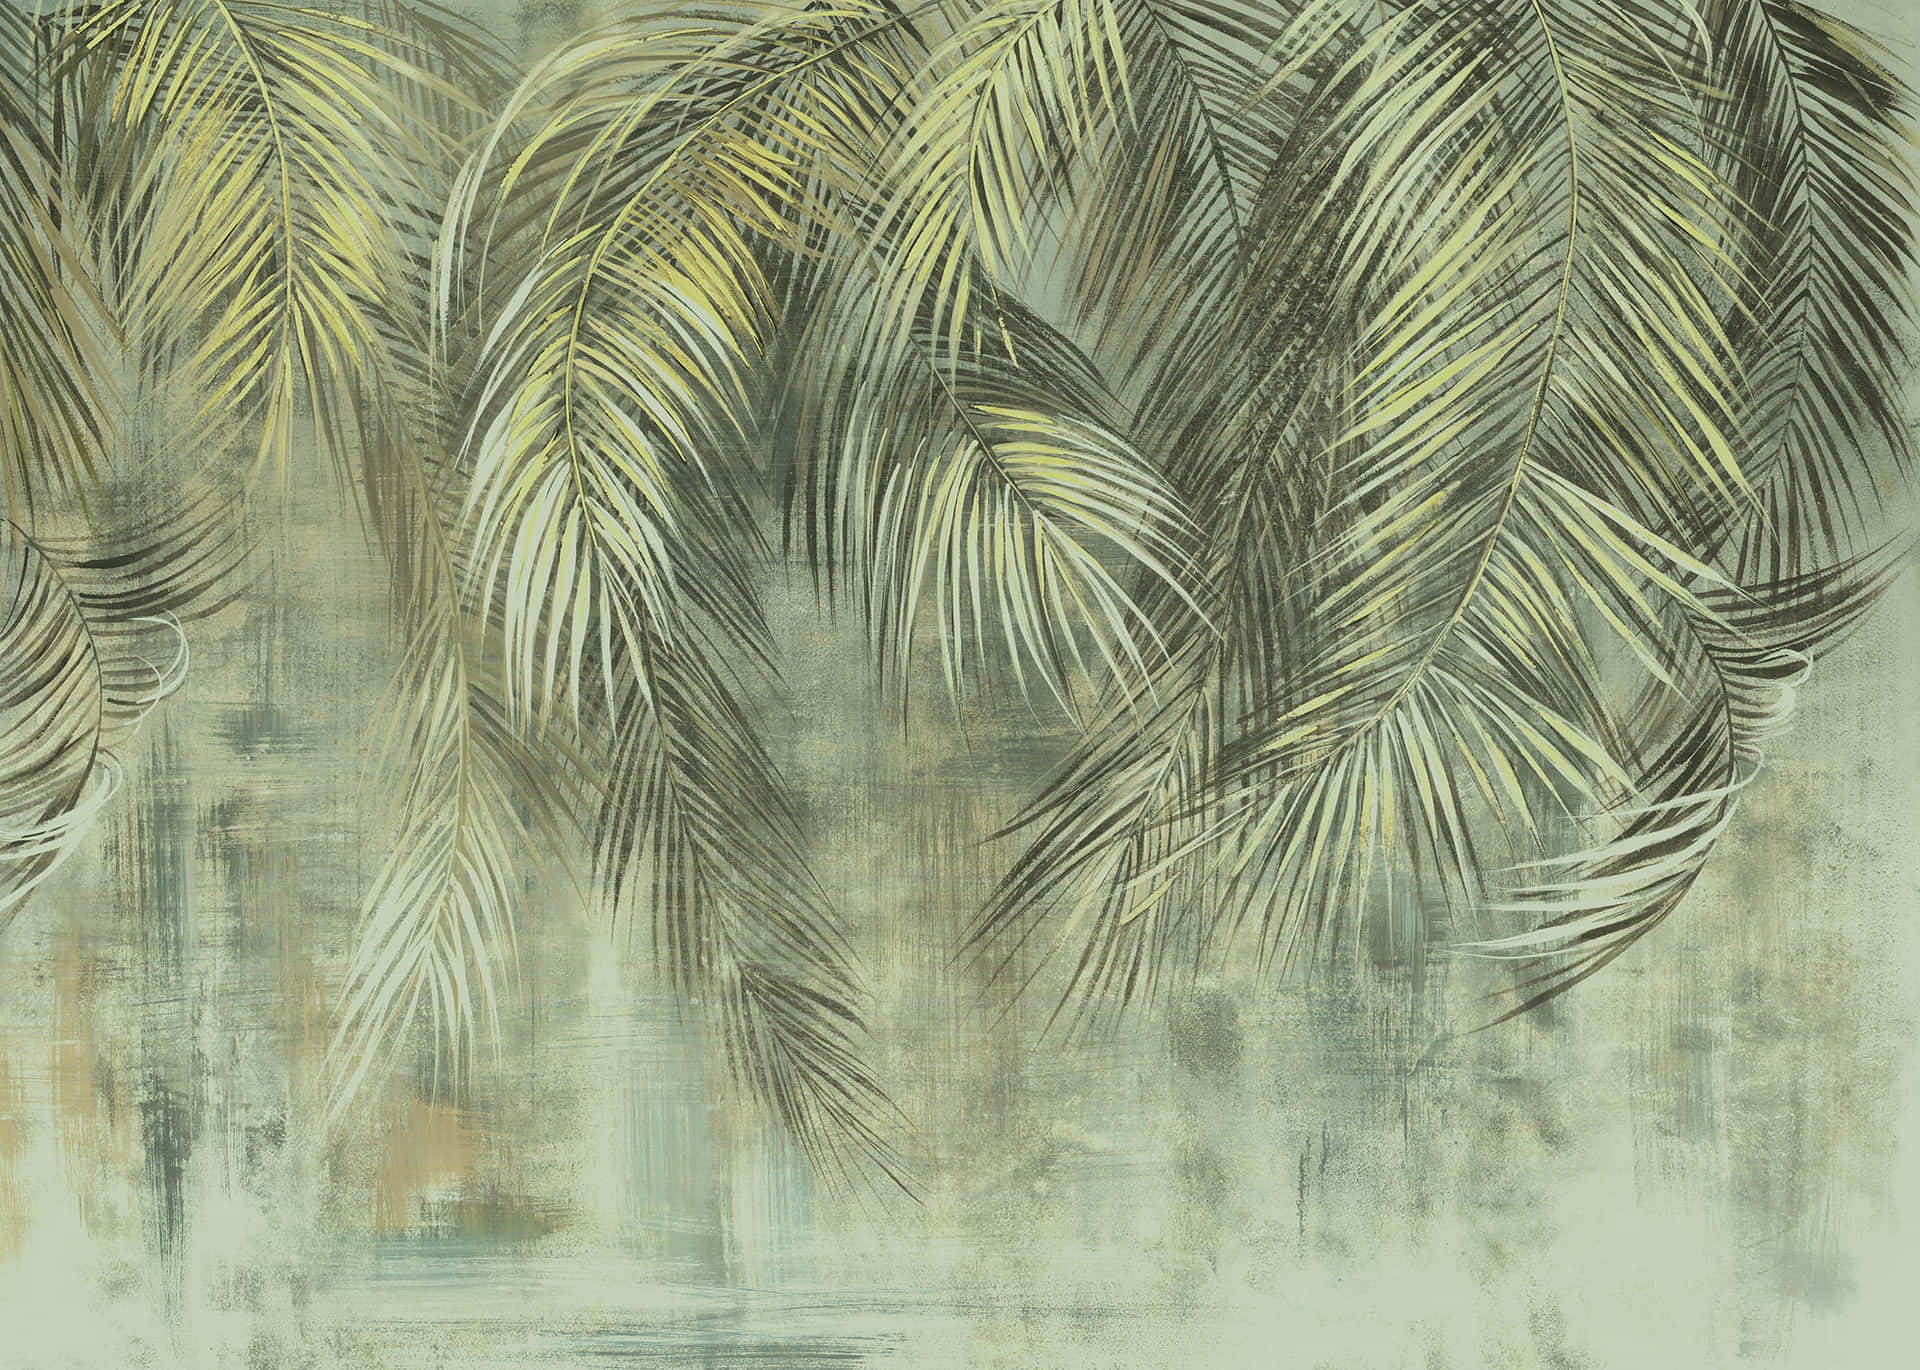 Abstract Palm Fronds Artwork Wallpaper